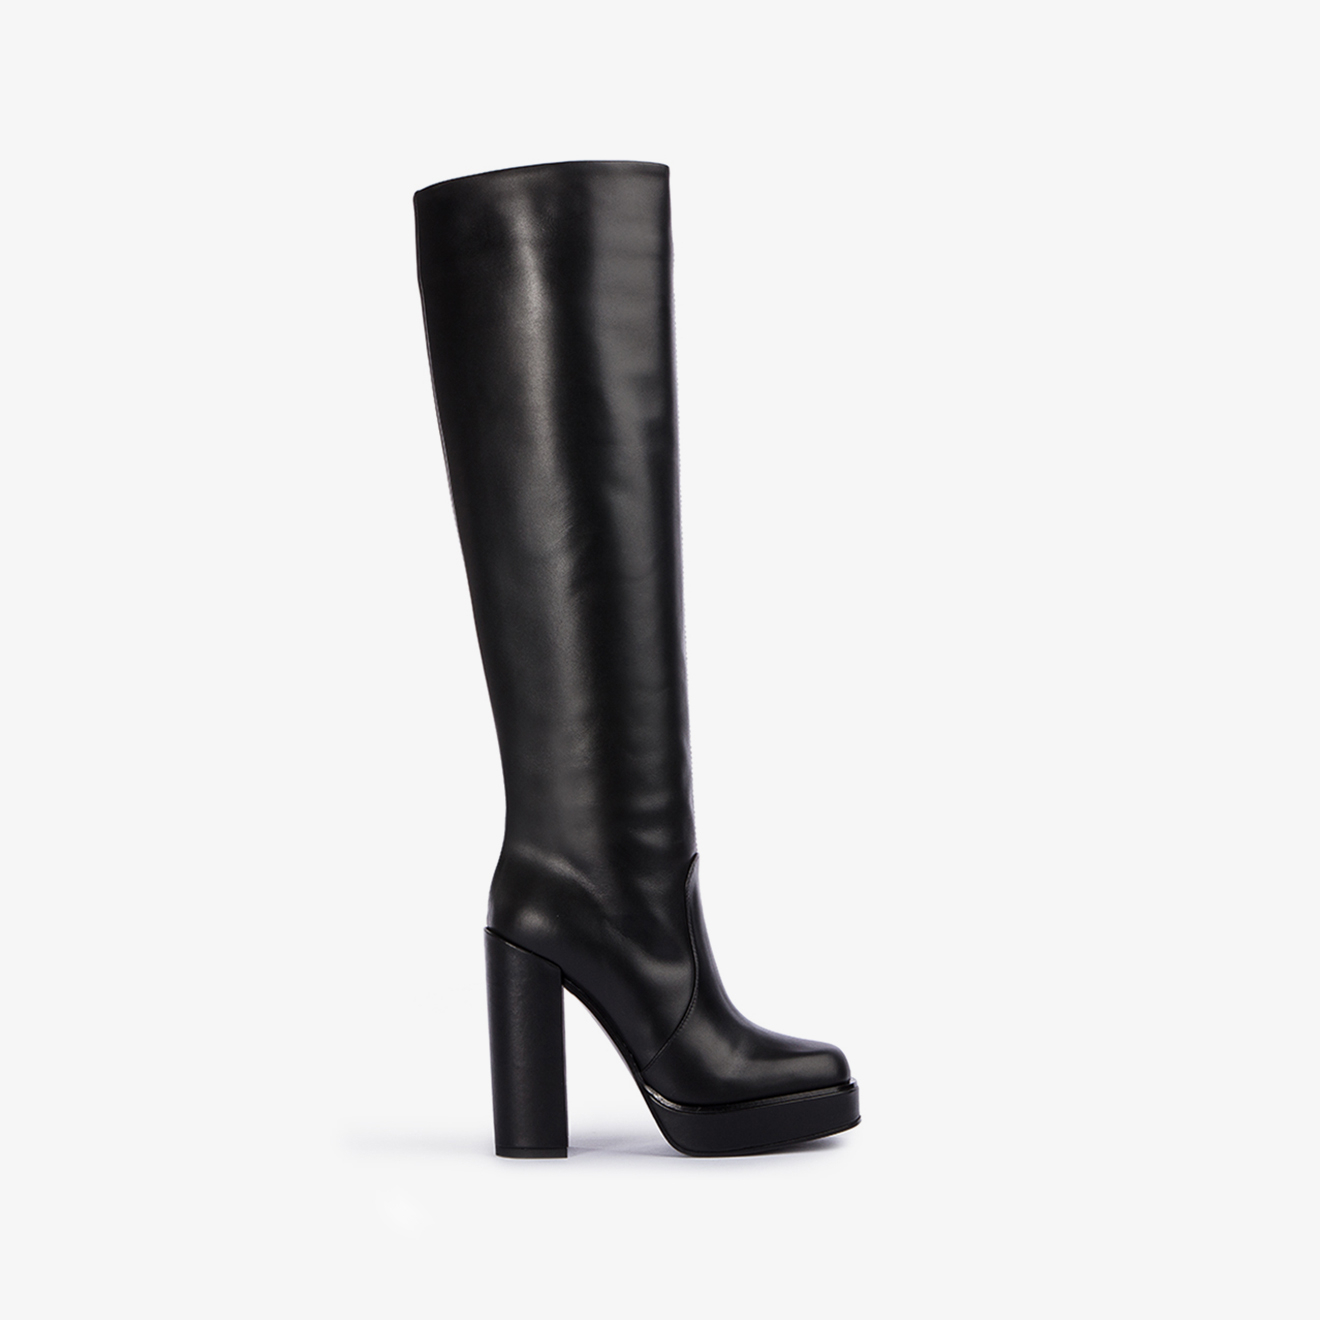 LANA BOOT 130 mm - Le Silla official outlet